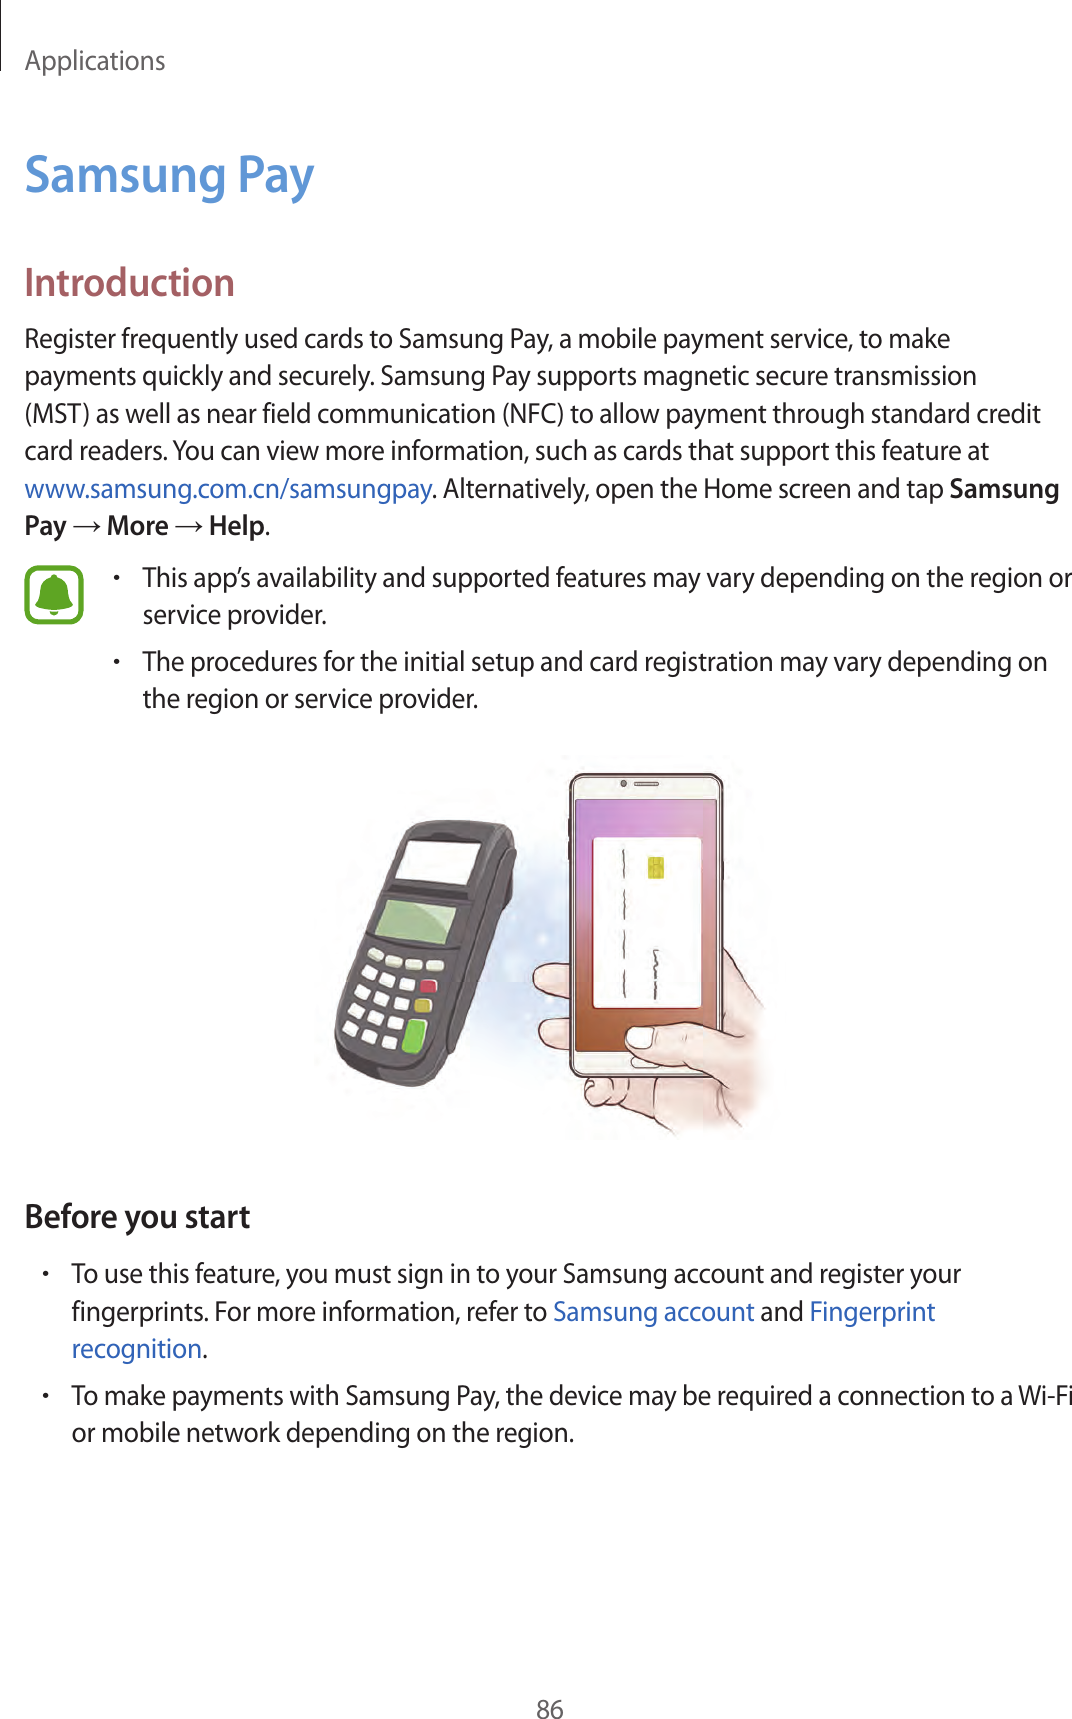 Applications86Samsung PayIntroductionRegister frequently used cards to Samsung Pay, a mobile payment service, to make payments quickly and securely. Samsung Pay supports magnetic secure transmission (MST) as well as near field communication (NFC) to allow payment through standard credit card readers. You can view more information, such as cards that support this feature at www.samsung.com.cn/samsungpay. Alternatively, open the Home screen and tap Samsung Pay → More → Help.•This app’s availability and supported features may vary depending on the region or service provider.•The procedures for the initial setup and card registration may vary depending on the region or service provider.Before you start•To use this feature, you must sign in to your Samsung account and register your fingerprints. For more information, refer to Samsung account and Fingerprint recognition.•To make payments with Samsung Pay, the device may be required a connection to a Wi-Fi or mobile network depending on the region.